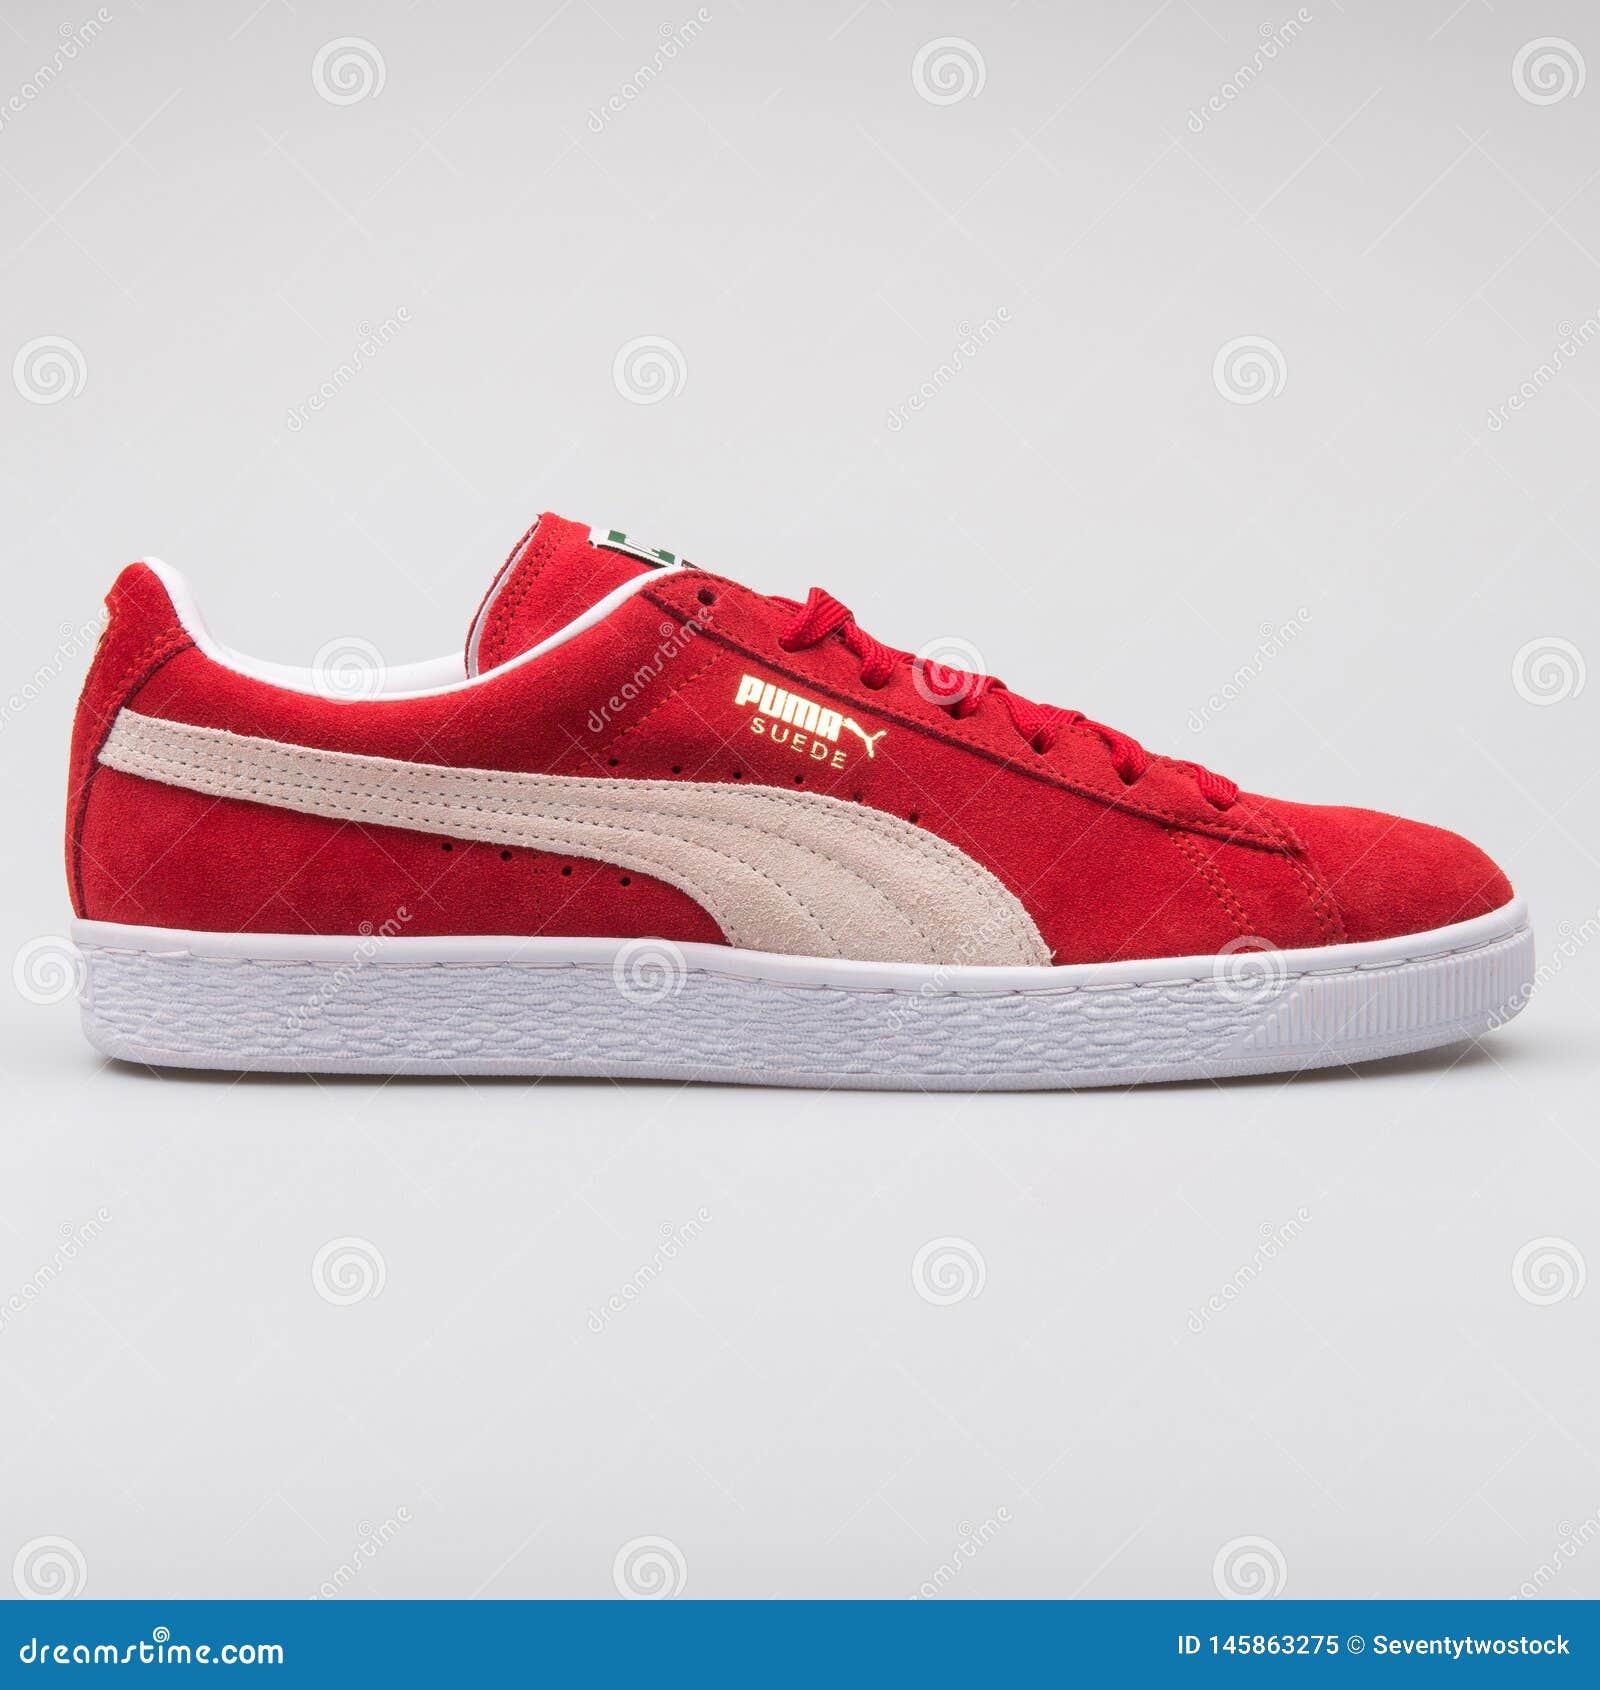 Puma Suede Classic Red Editorial Image - Image of sole, lifestyle: 145863275